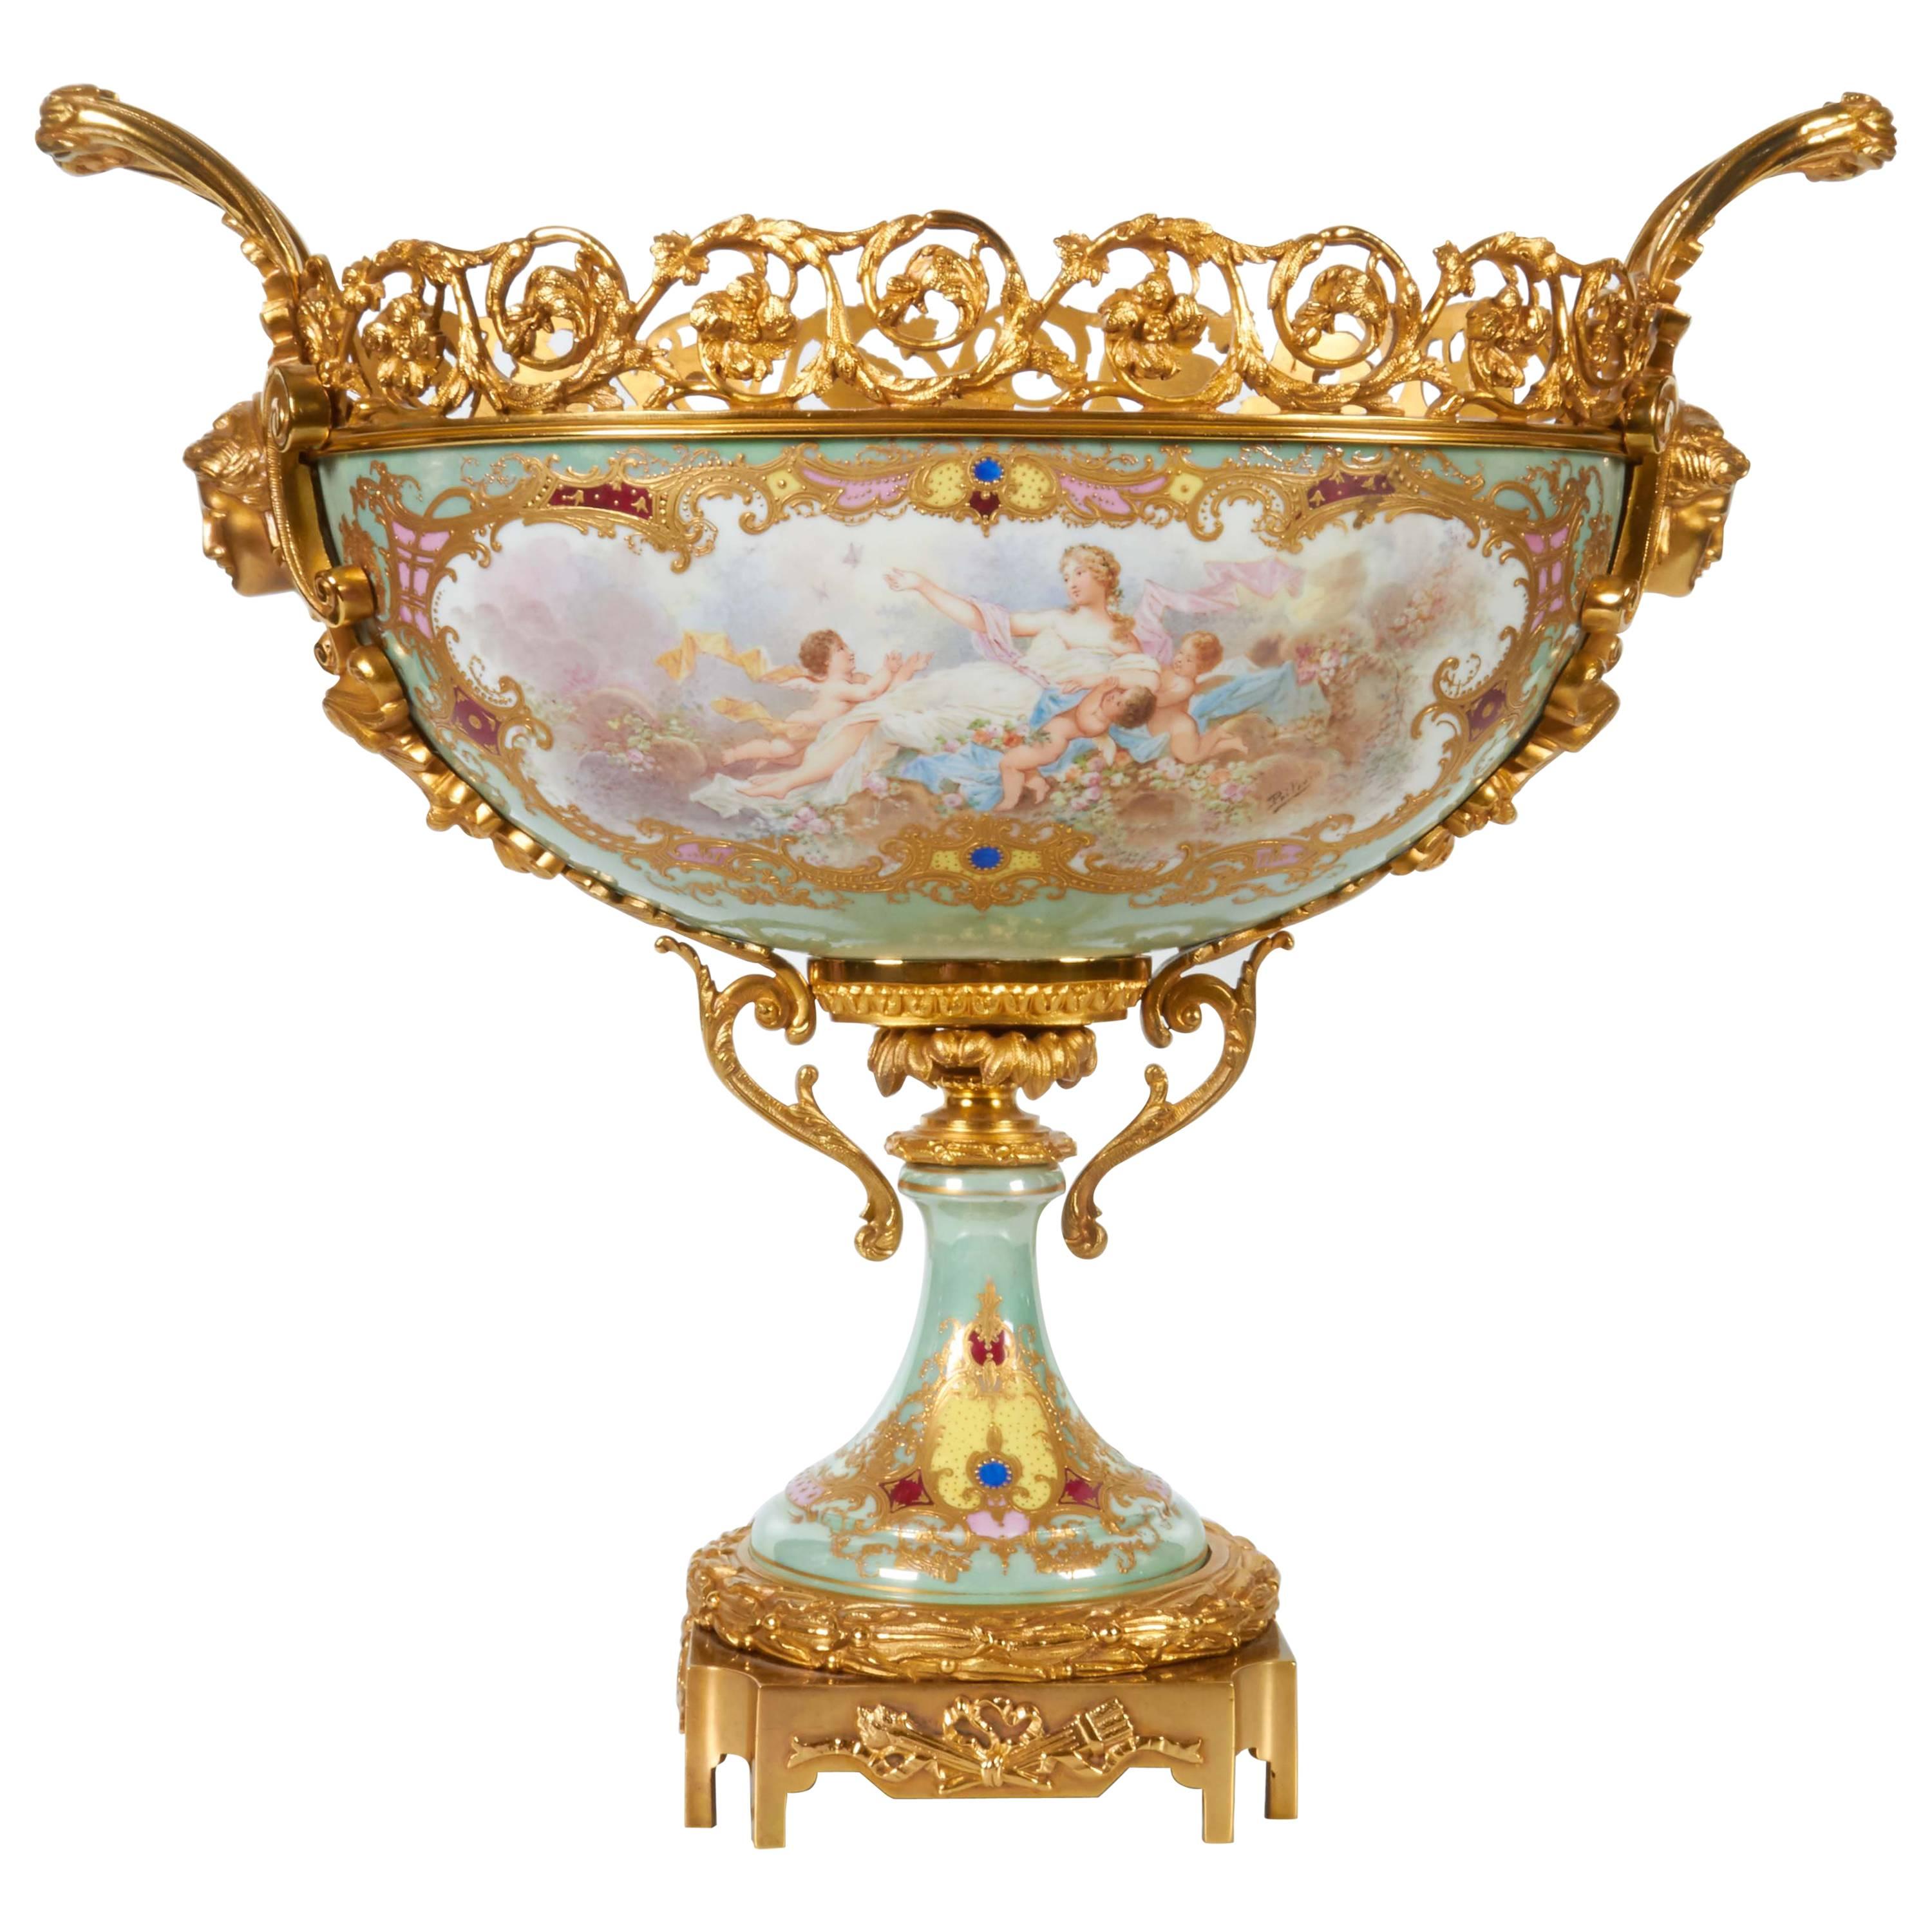 French Sèvres Porcelain & Ormolu-Mounted Hand-Painted Oval Centerpiece/Jardenier